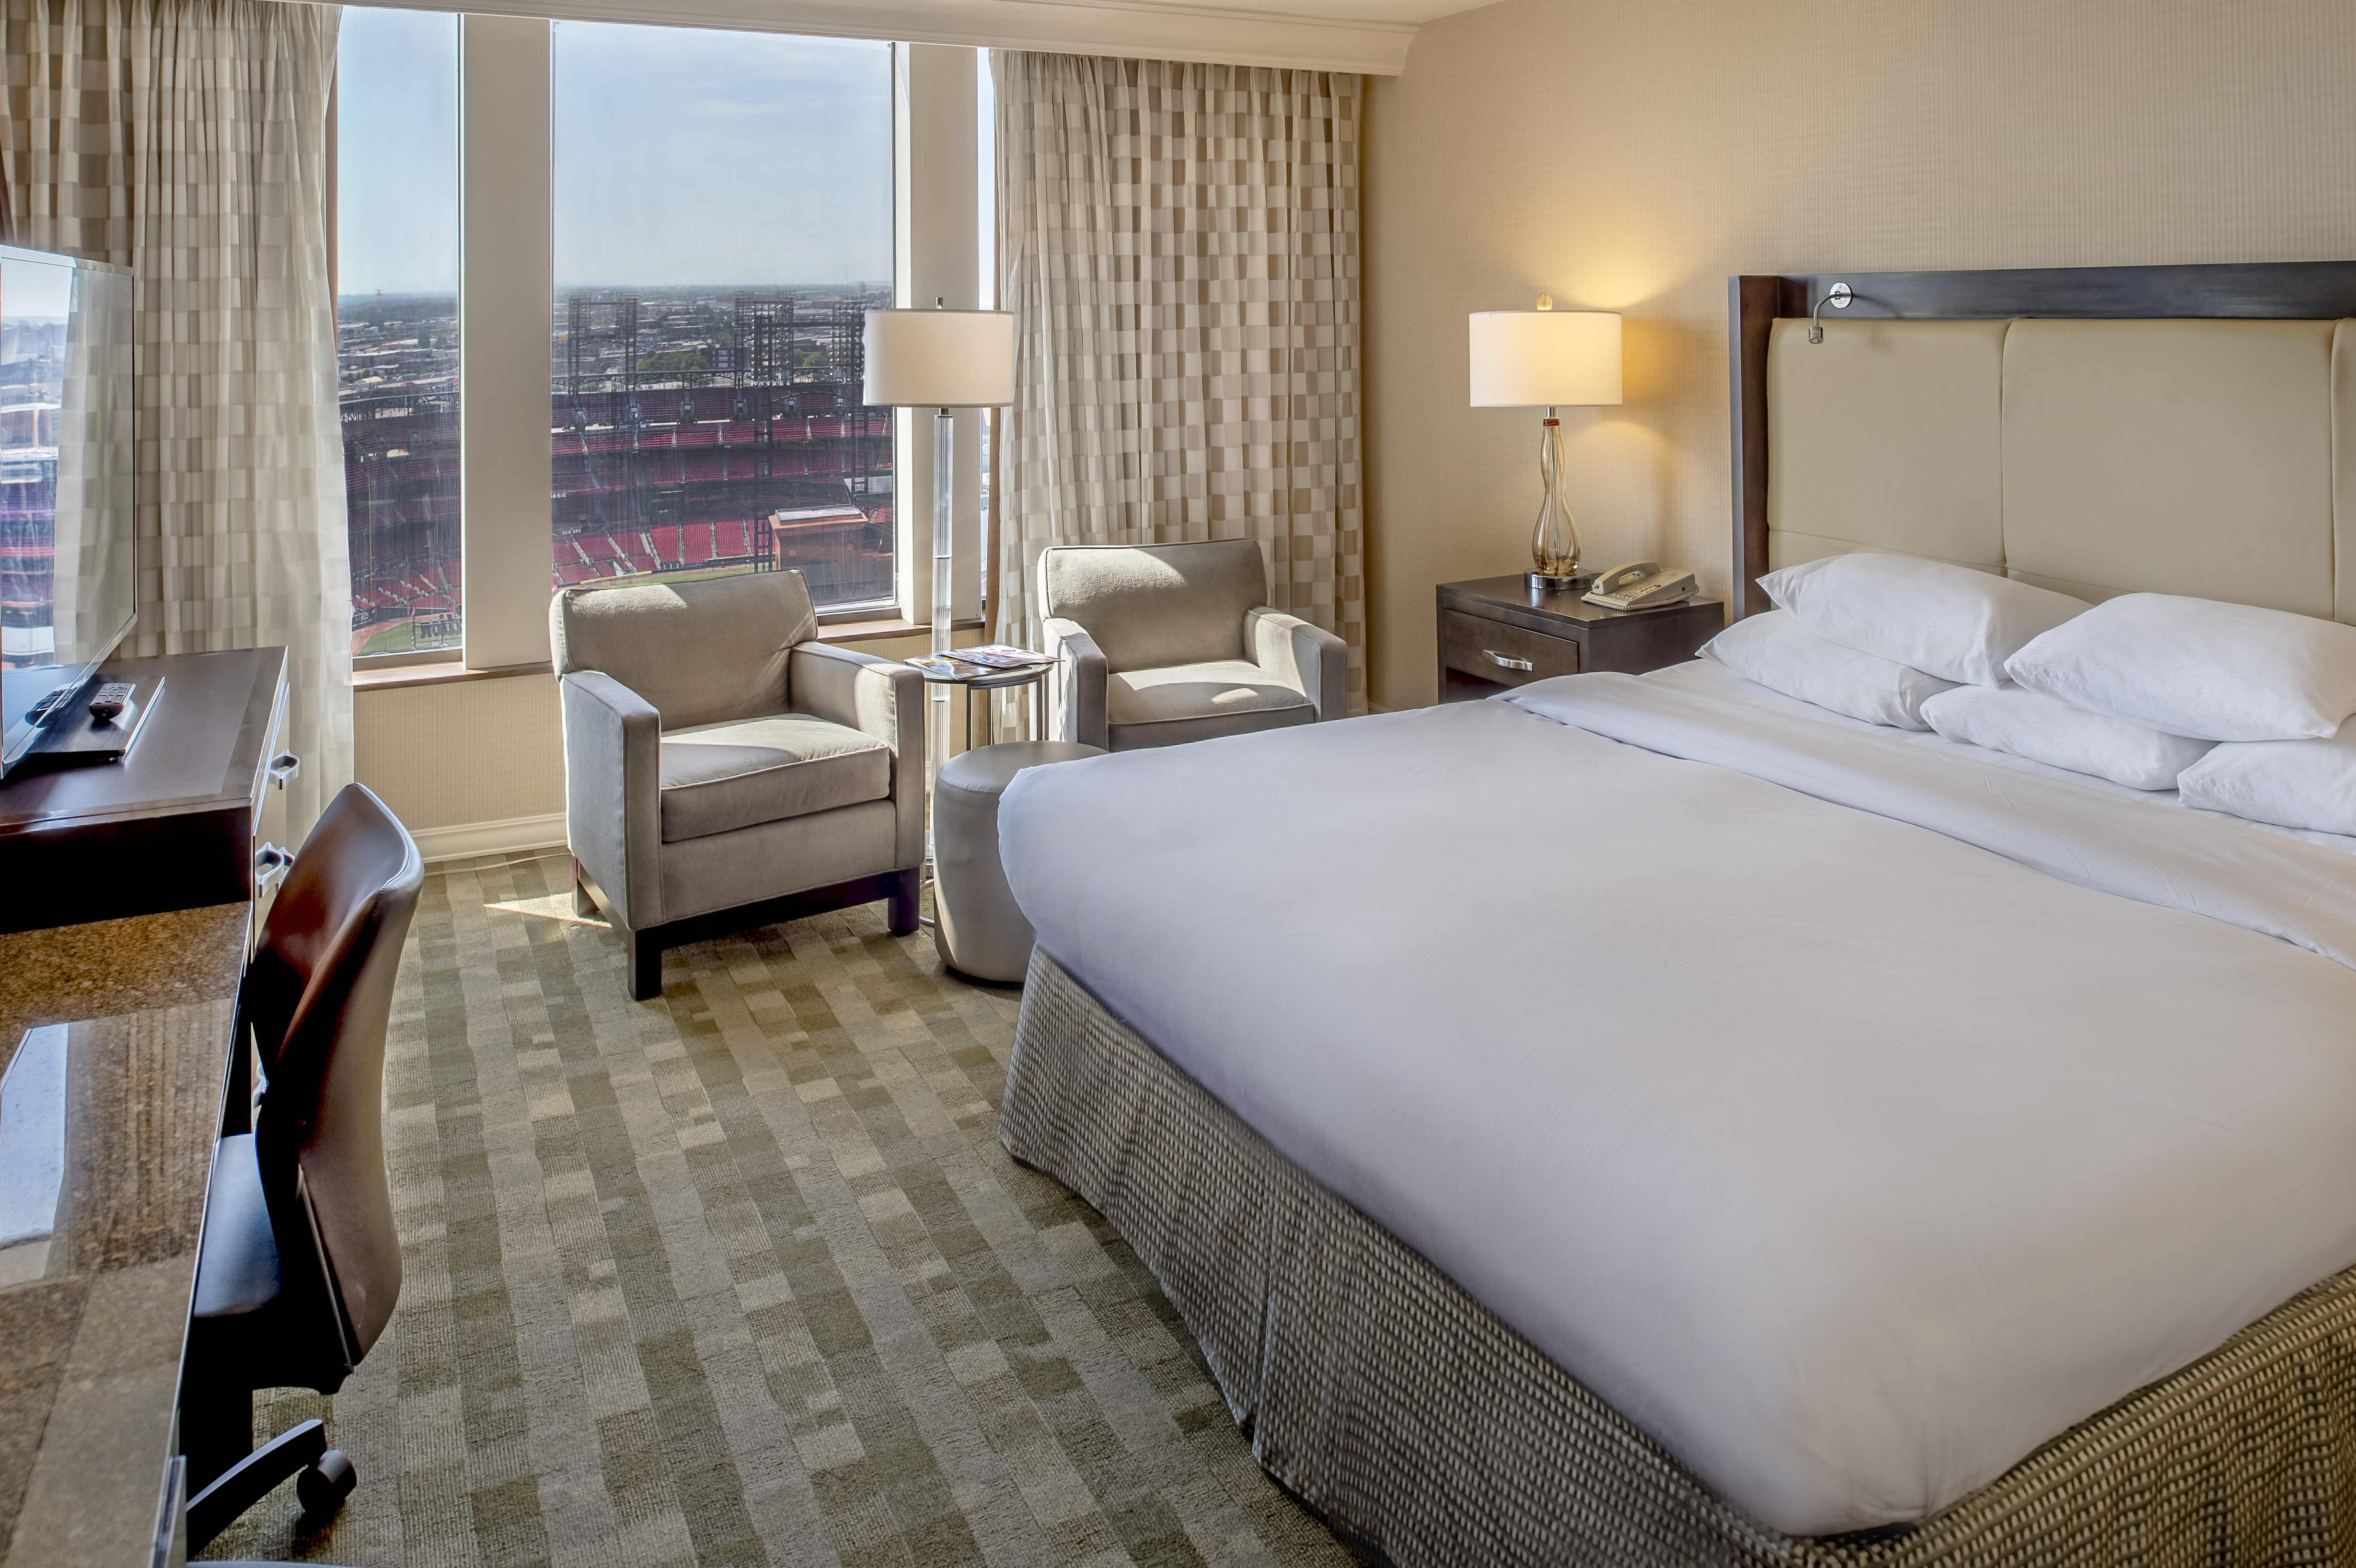 Accessible Guestroom with King Bed, Work Desk, Chairs and Outside View of Stadium